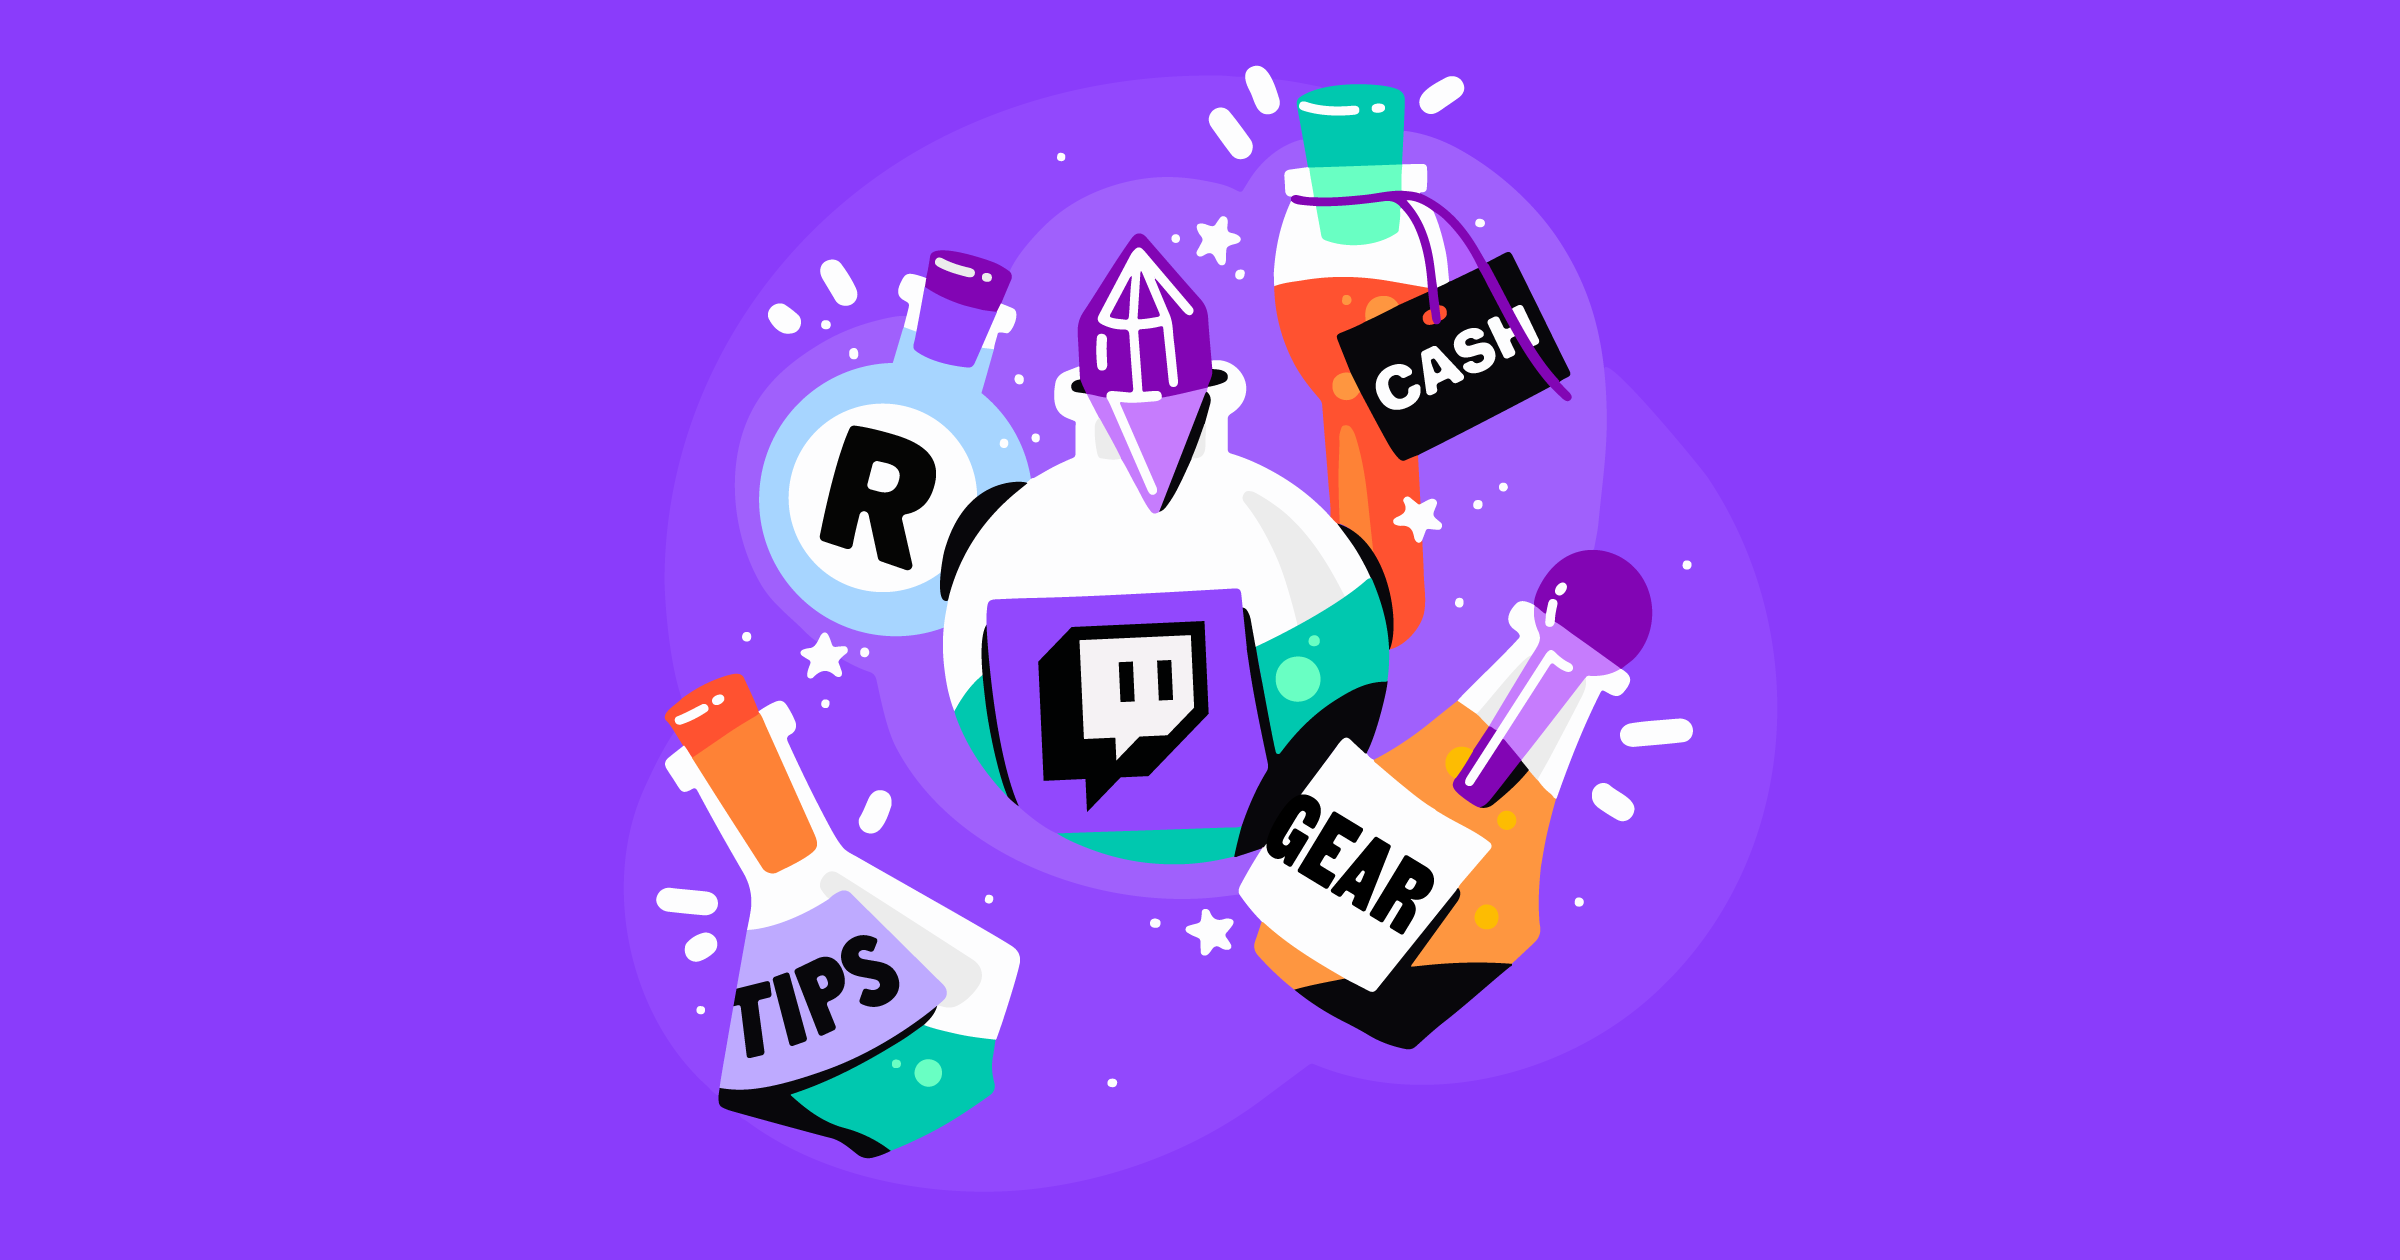 The ultimate guide to Twitch live streaming